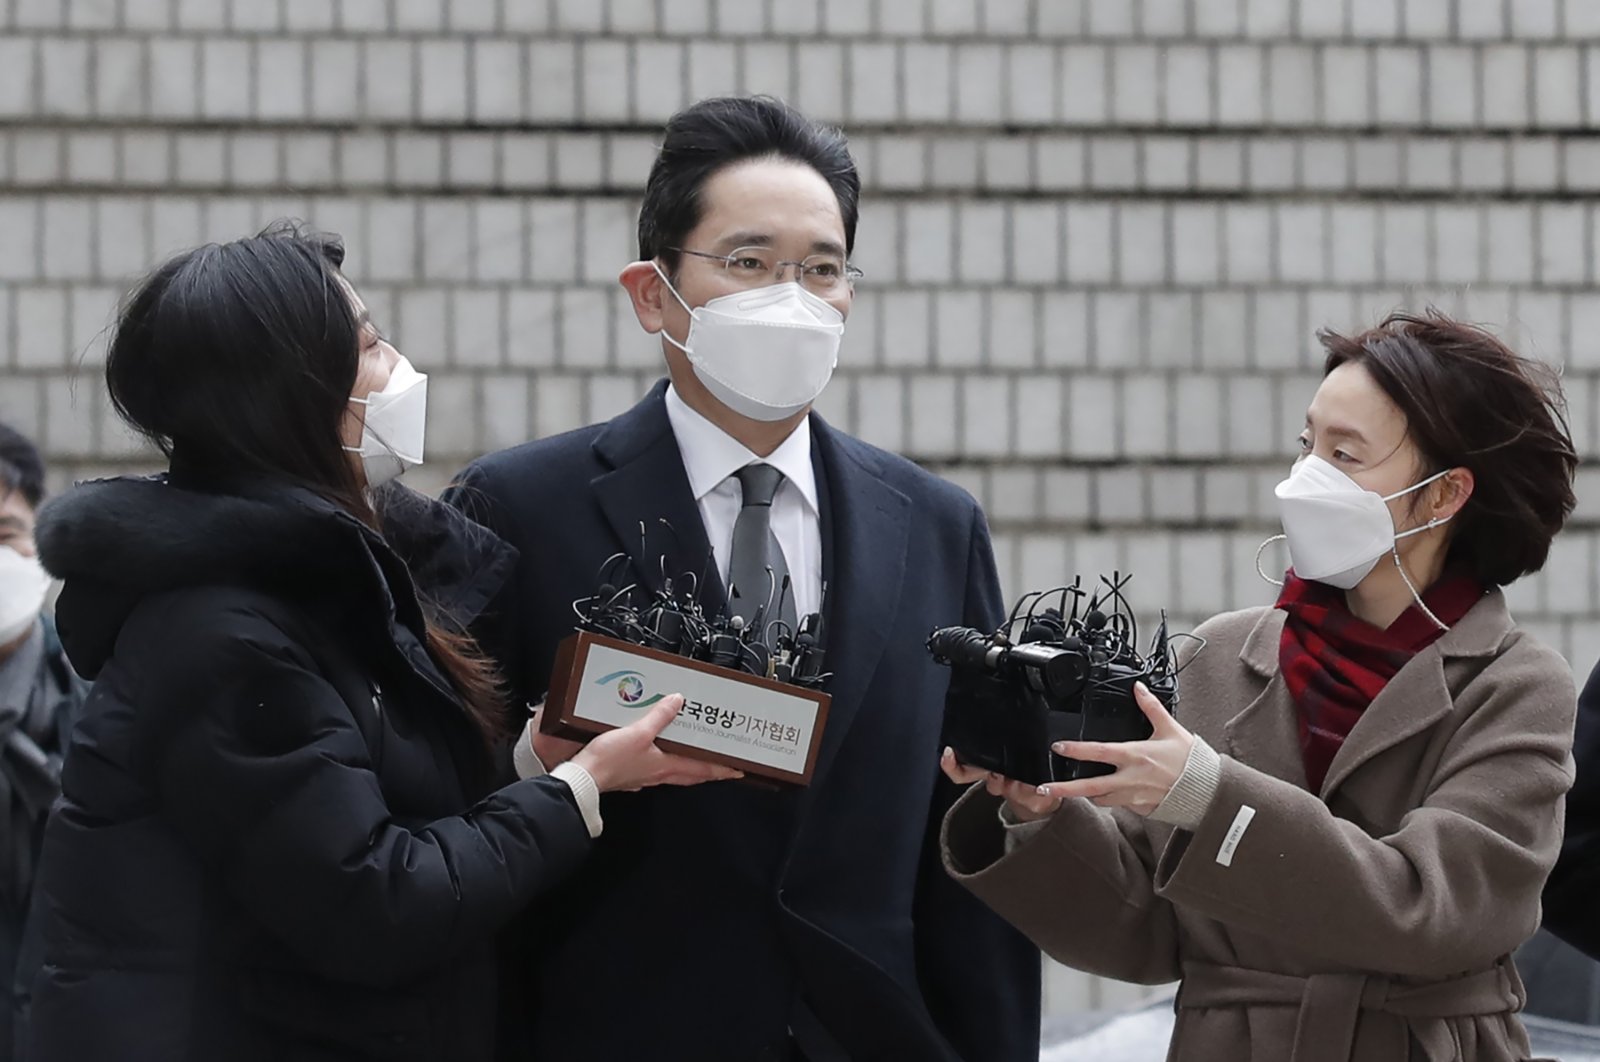 Samsung Electronics Vice Chairman Lee Jae-yong (C) is questioned by reporters upon his arrival at the Seoul High Court in Seoul, South Korea, Jan. 18, 2021. (AP Photo)